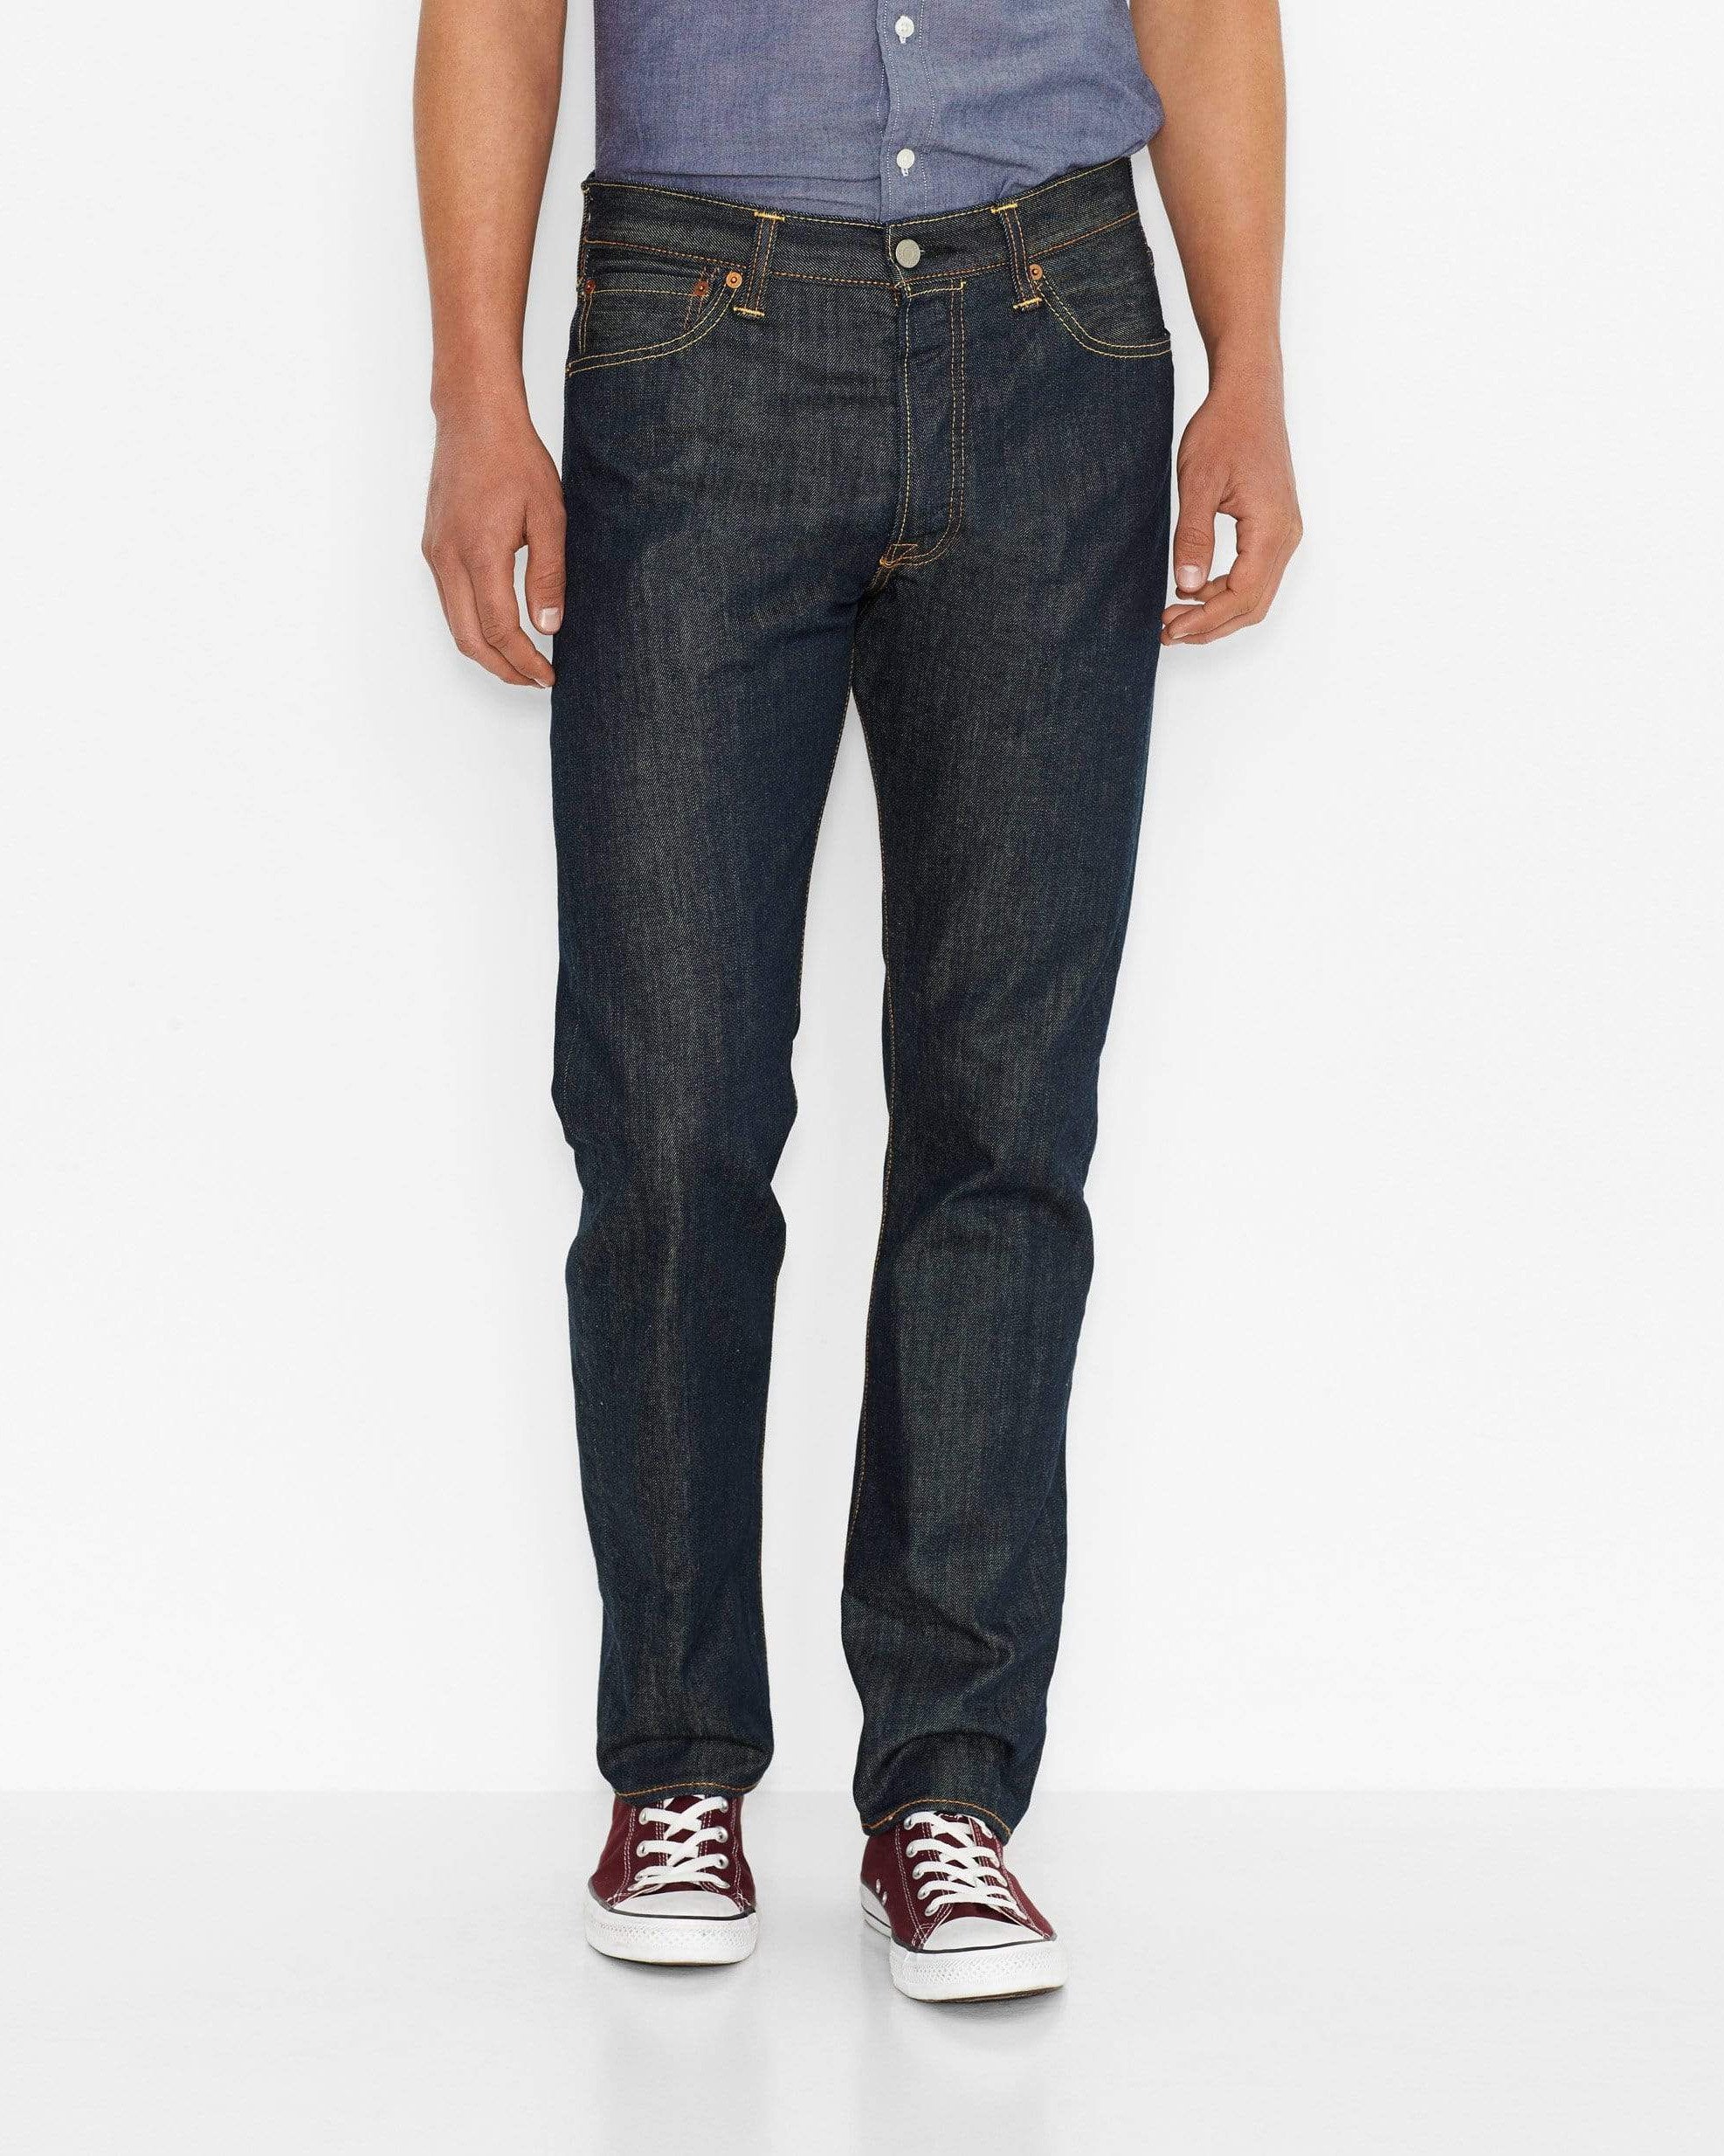 Levis 501 Original Regular Fit Mens Jeans - Marlon - Jeans and Fashion from Jeanstore